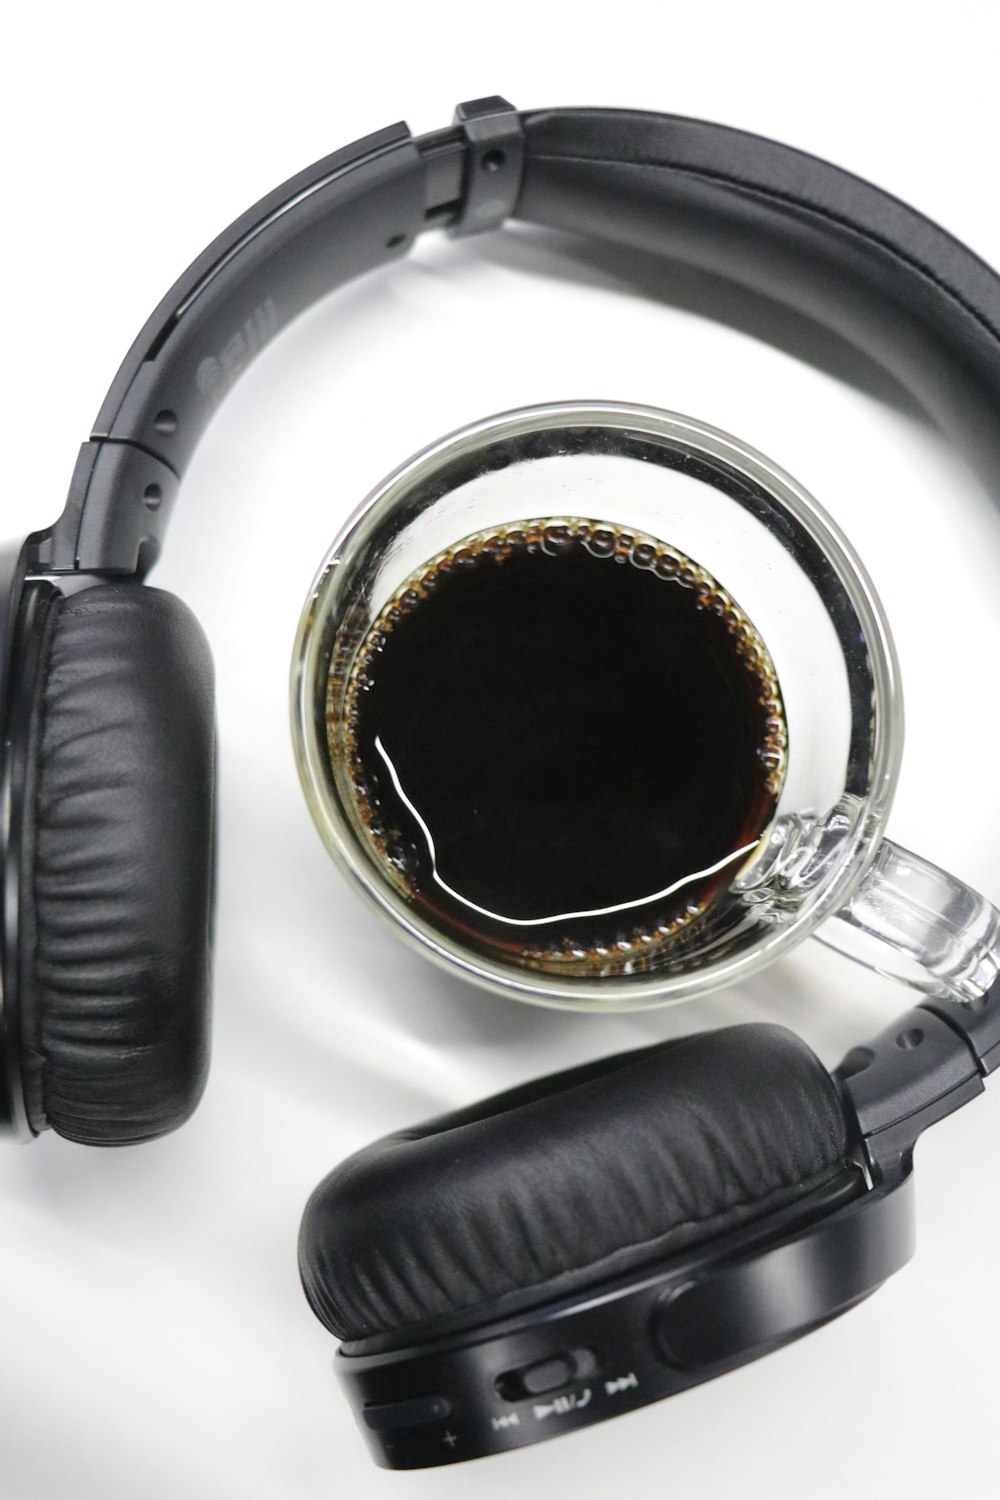 half-filled clear glass cup in black wireless headphones